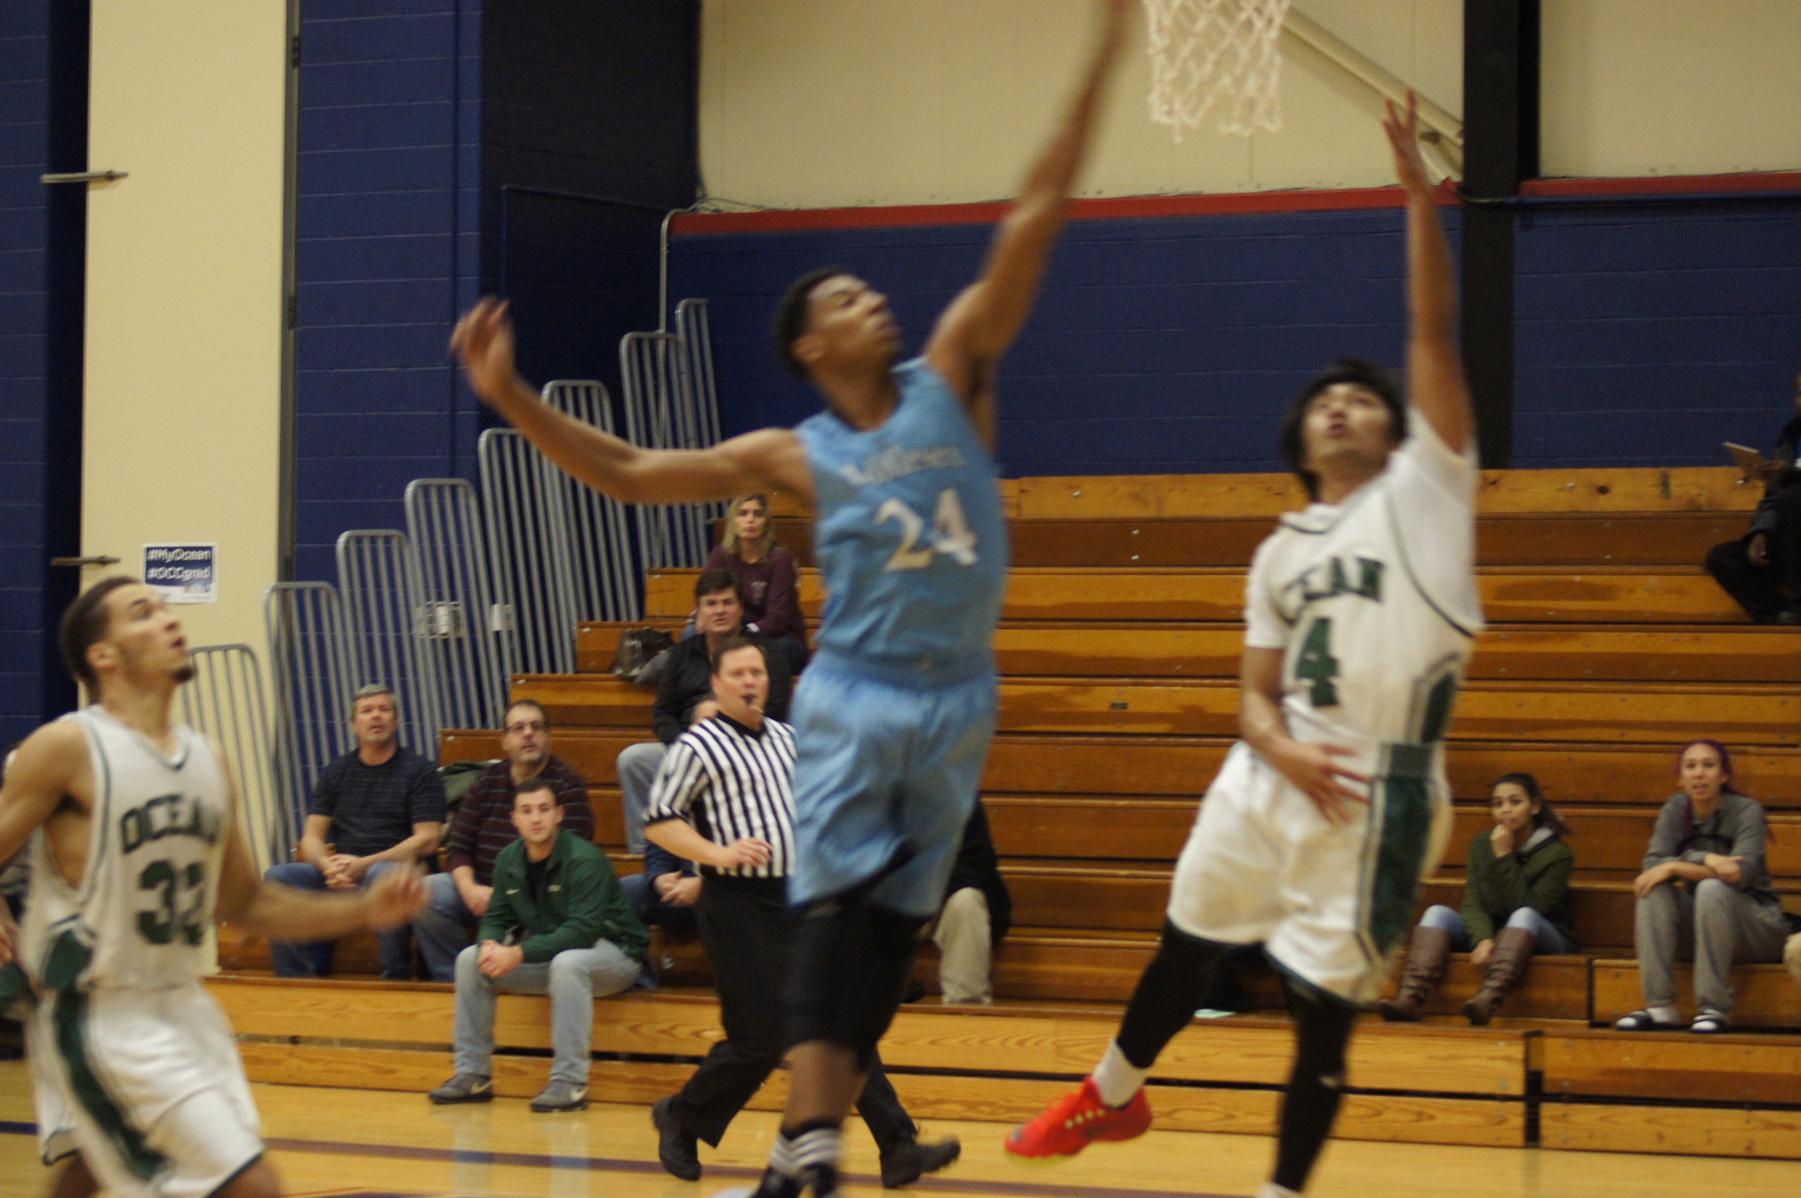 Men's Basketball Fall 80-77 in an Exciting Game with Middlesex